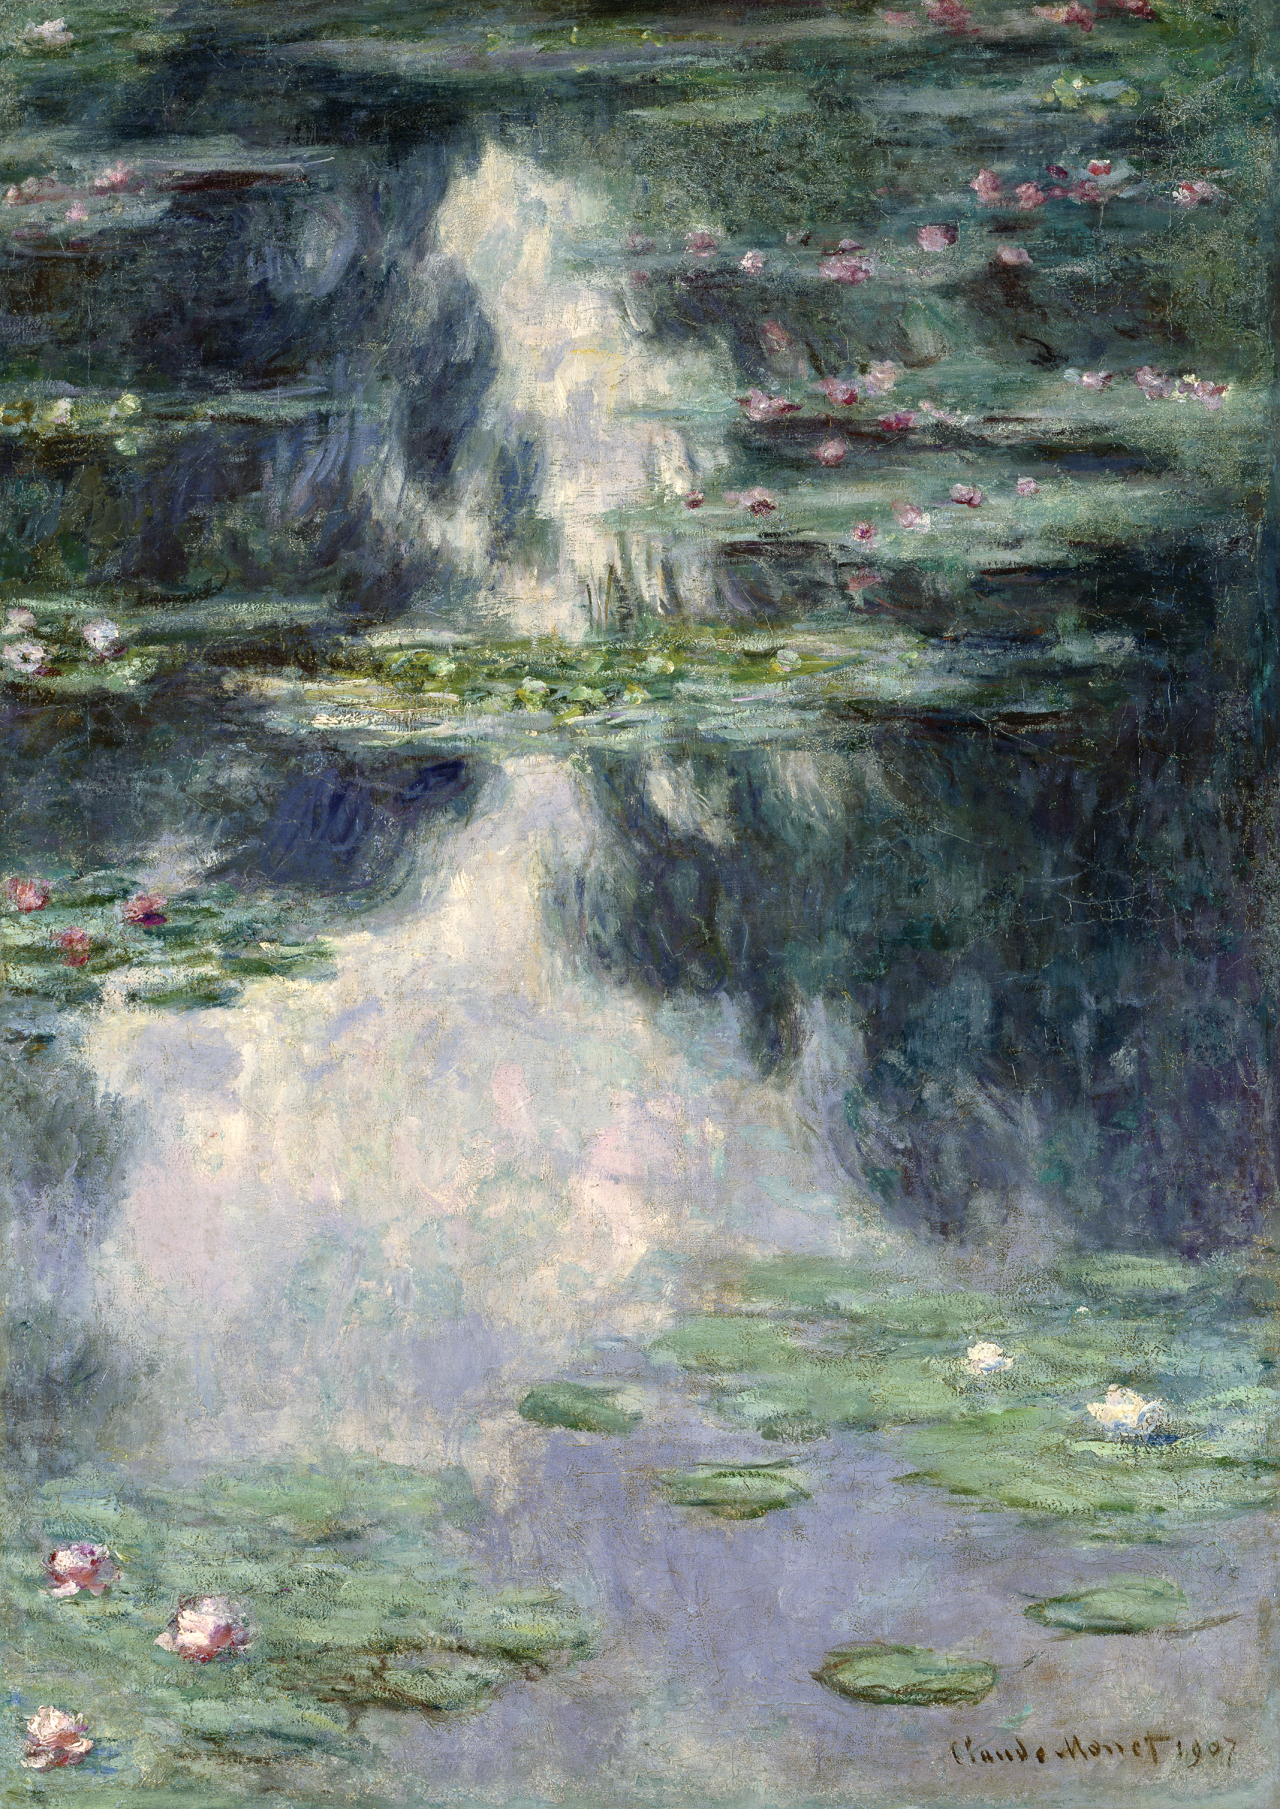 “Pond With Water Lilies” by Claude Monet in 1907 (Seoul Arts Center)